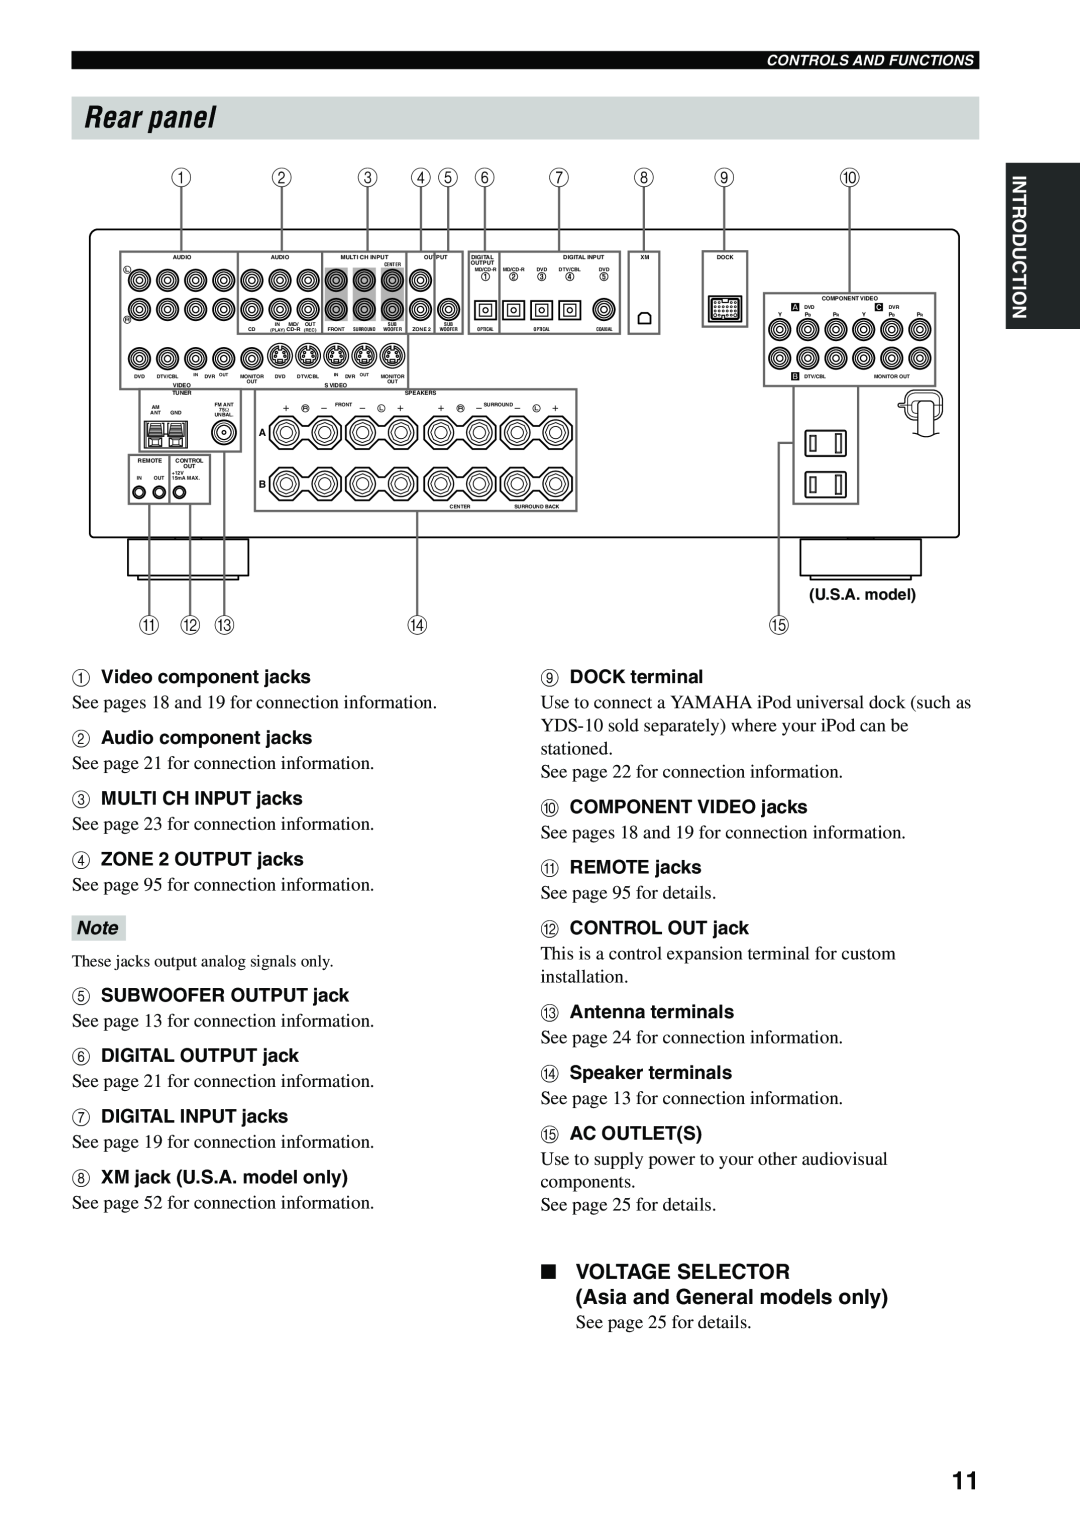 Yamaha RX-V559 owner manual Rear panel, A B C, VOLTAGE SELECTOR Asia and General models only 